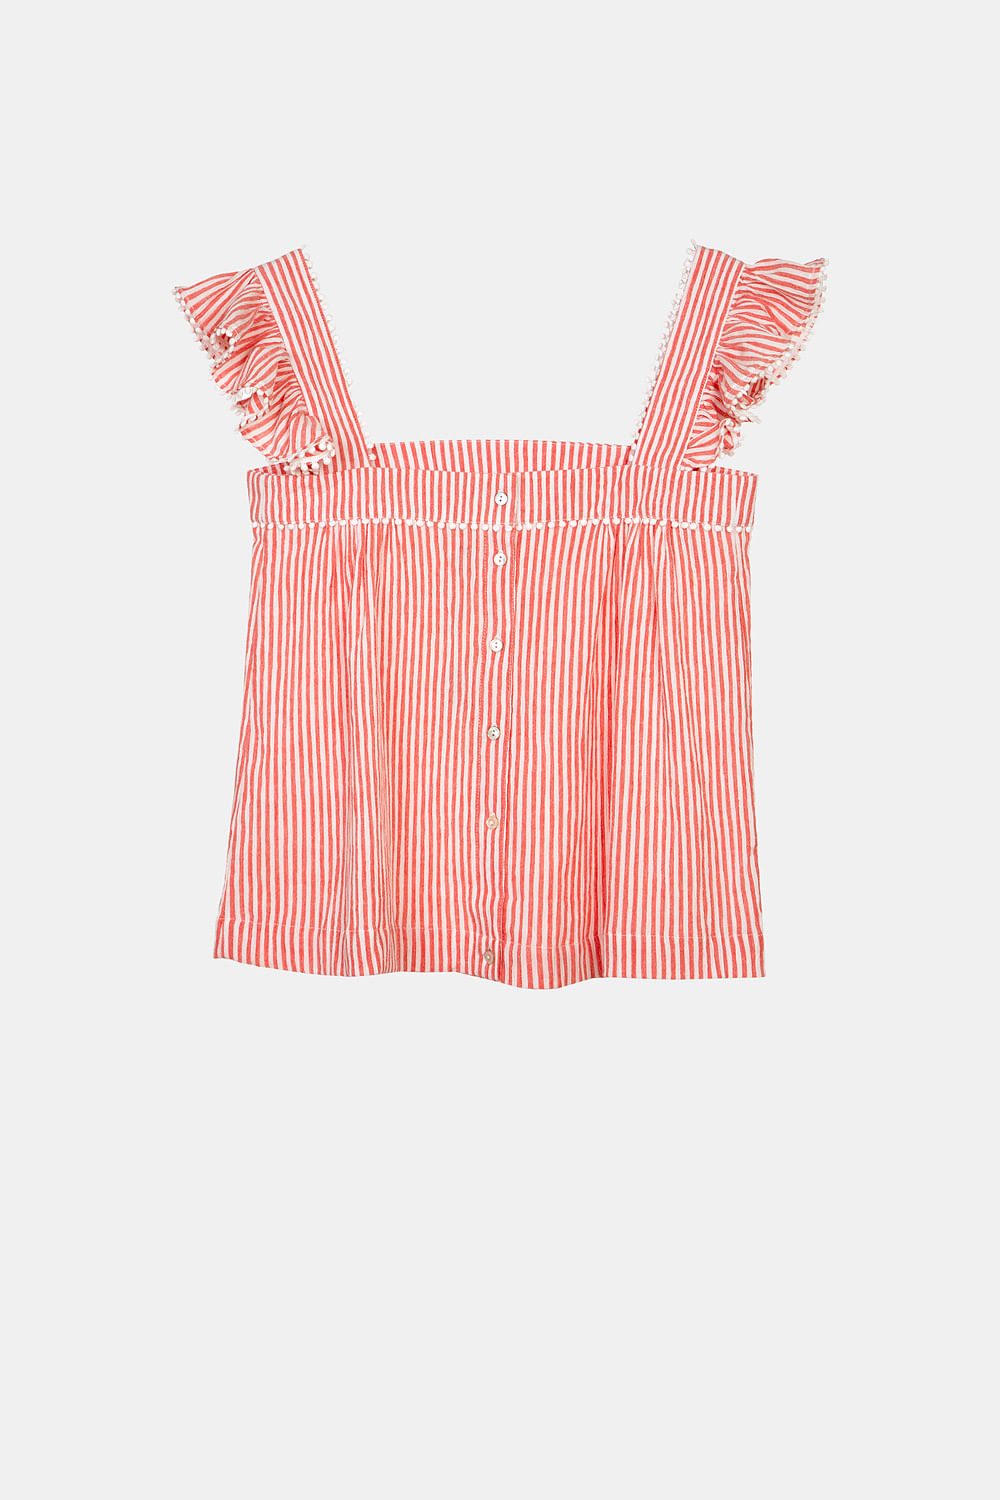 STRIPED TOP IN COTTON